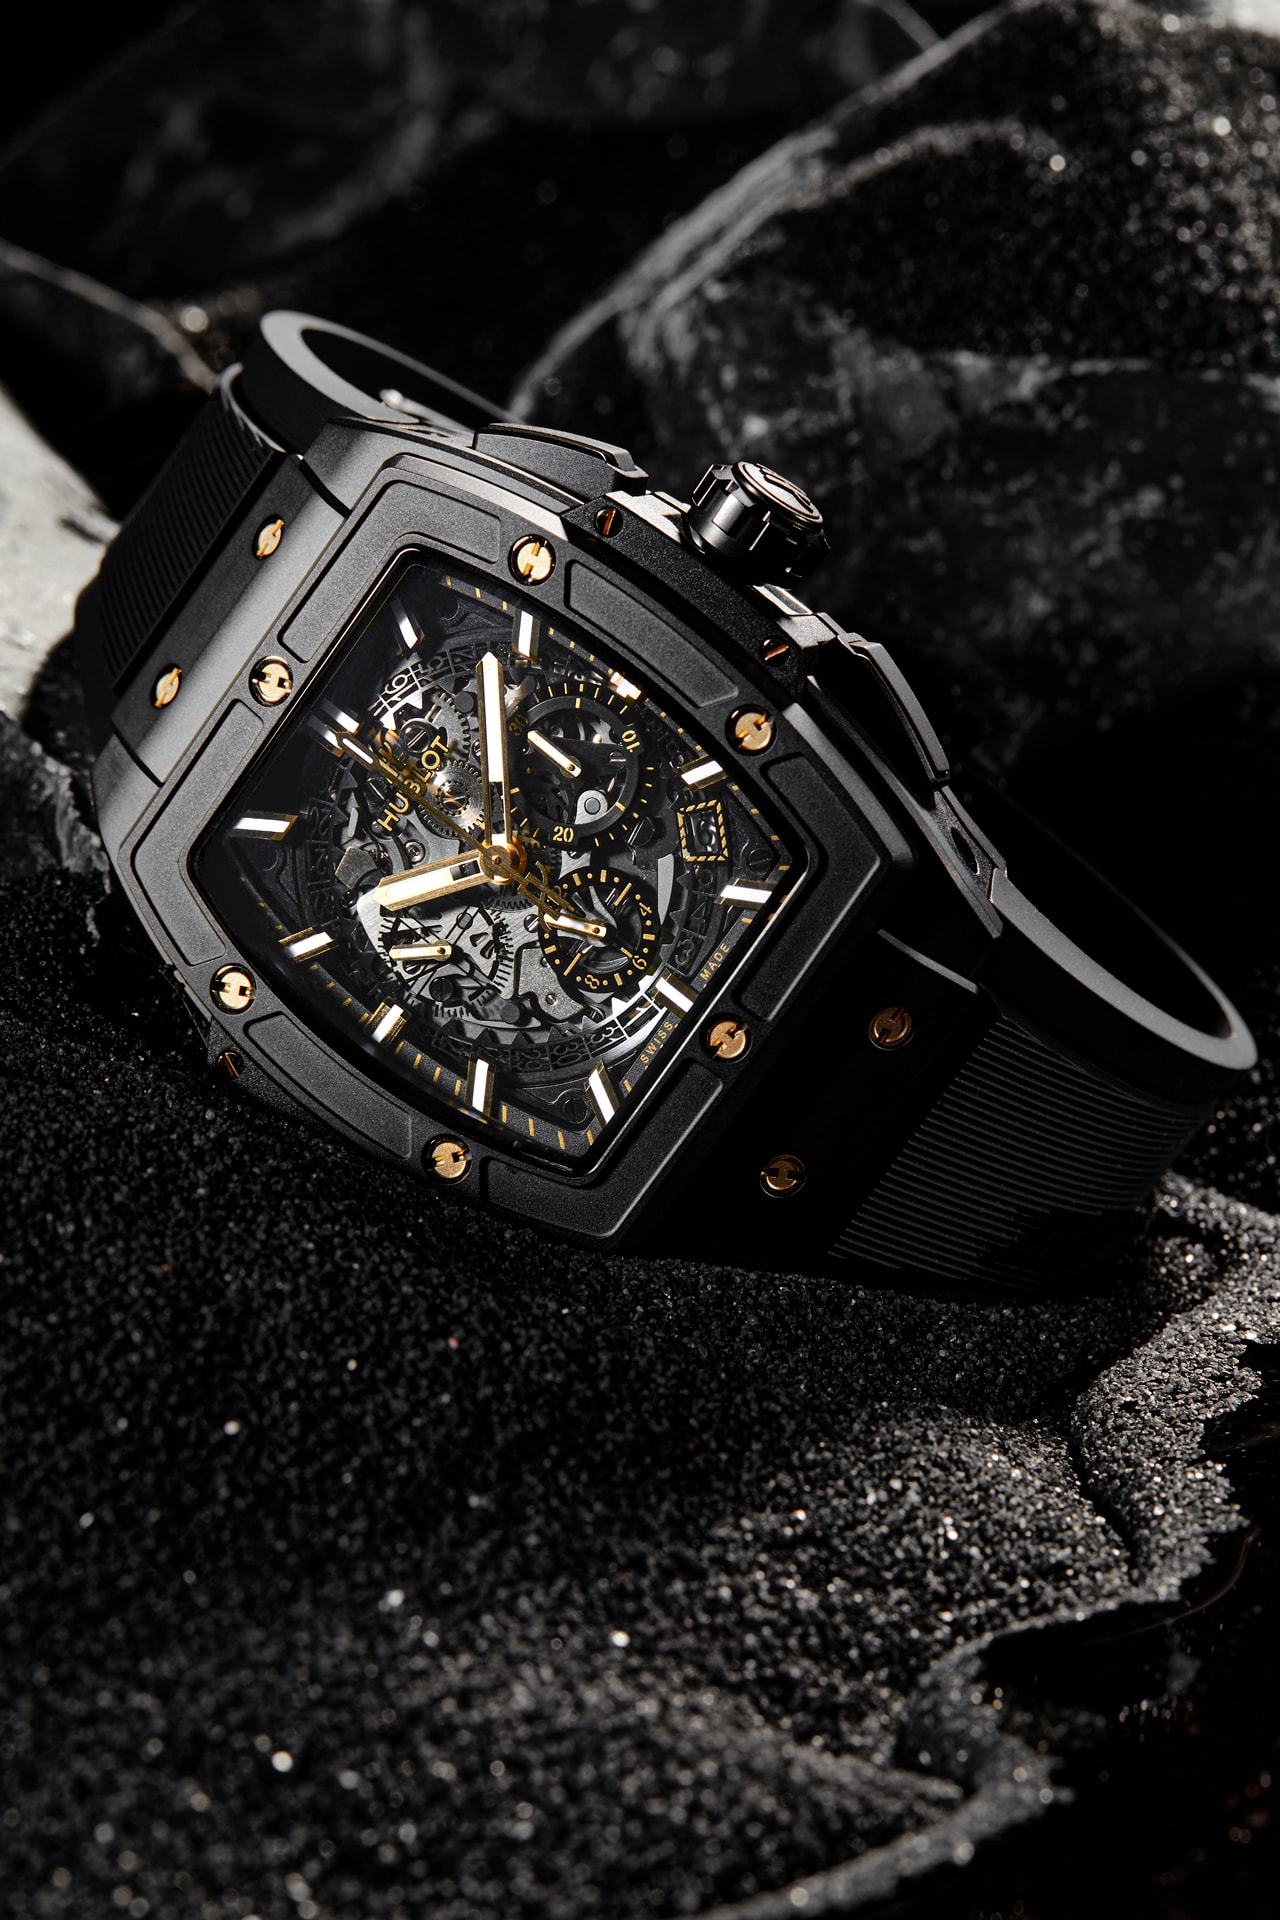 Hublot South East Asia Special Edition Watches Big Bang references (44 mm, 41 mm and 38 mm), the Classic Fusion 45 mm Aerofusion Chronograph Ceramic and the Spirit of Big Bang 42 mm